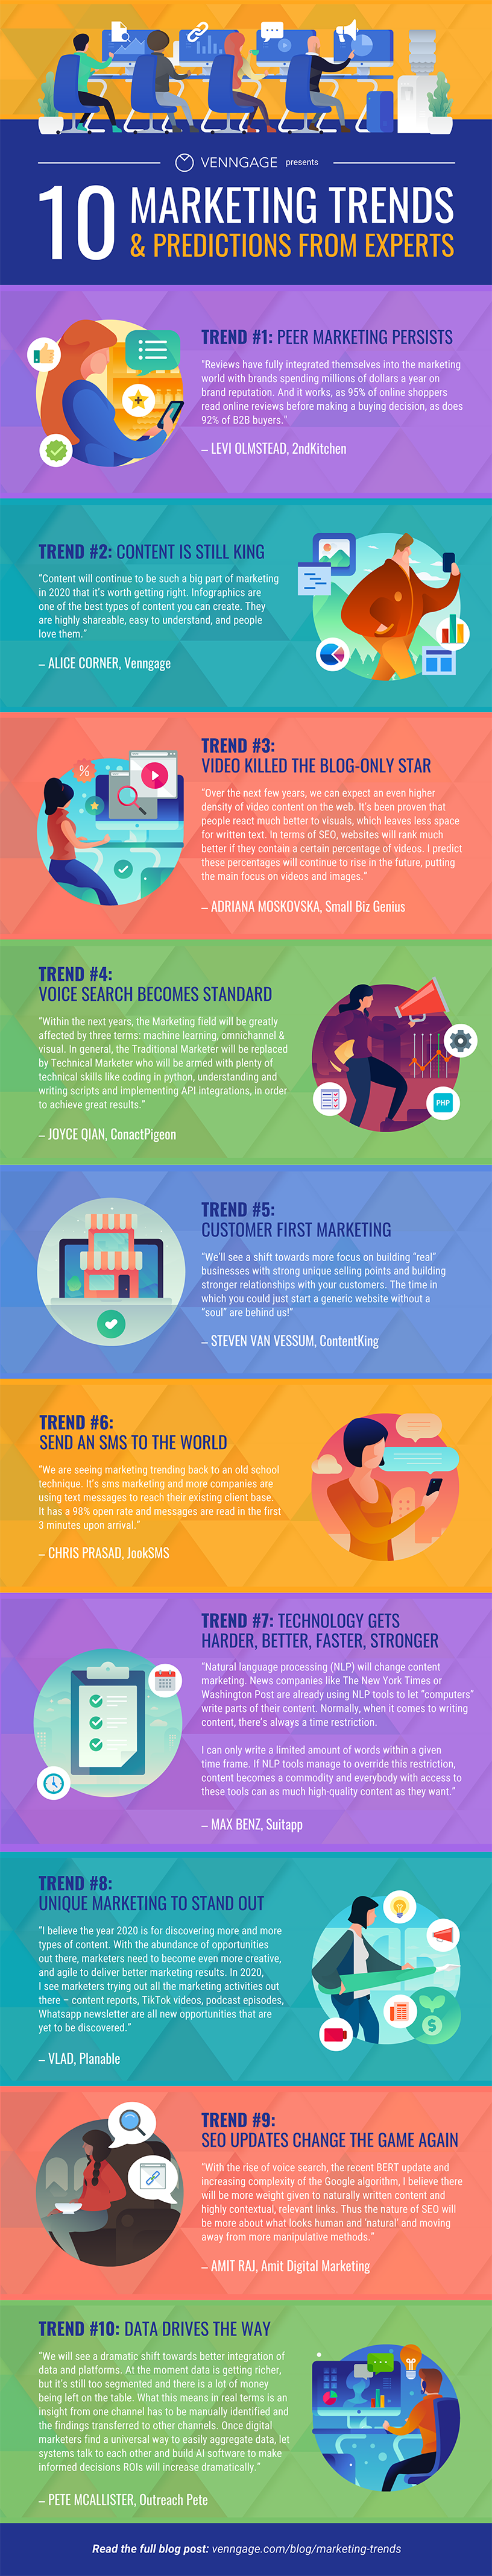 10 Marketing Trends to Look Out for in 2020 [Infographic]